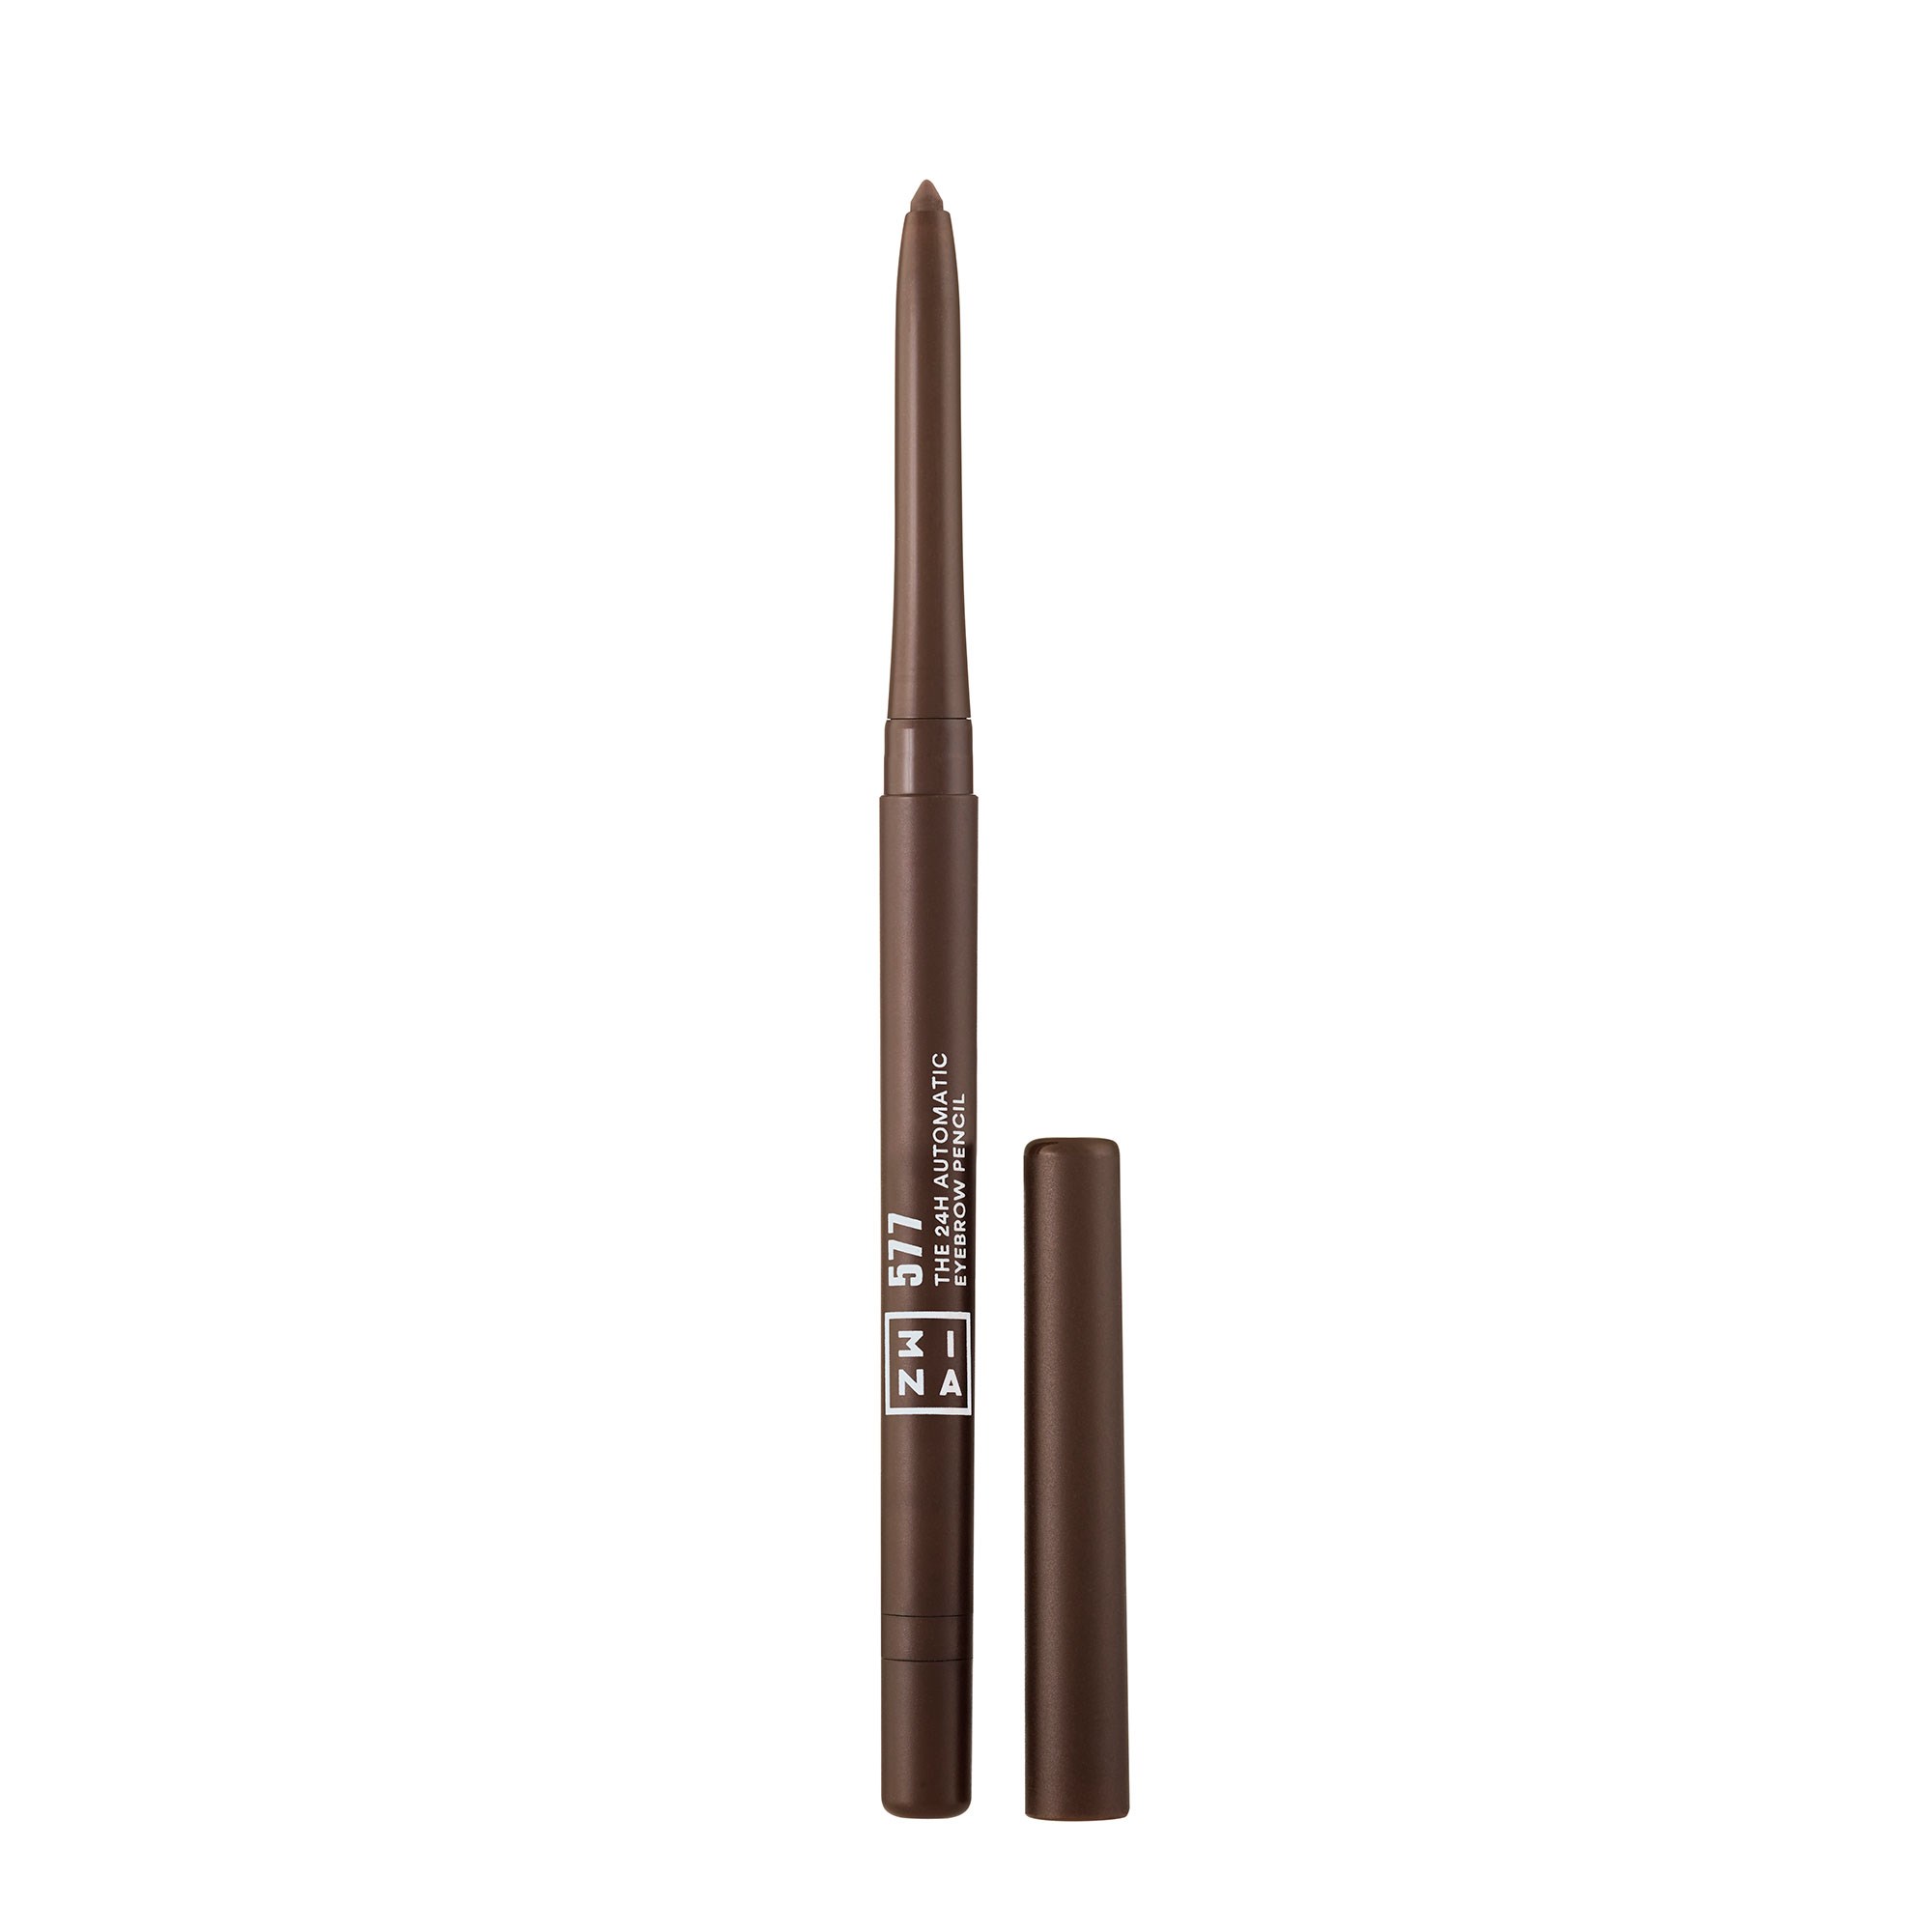 3INA The 24h Automatic Eyebrow Pencil